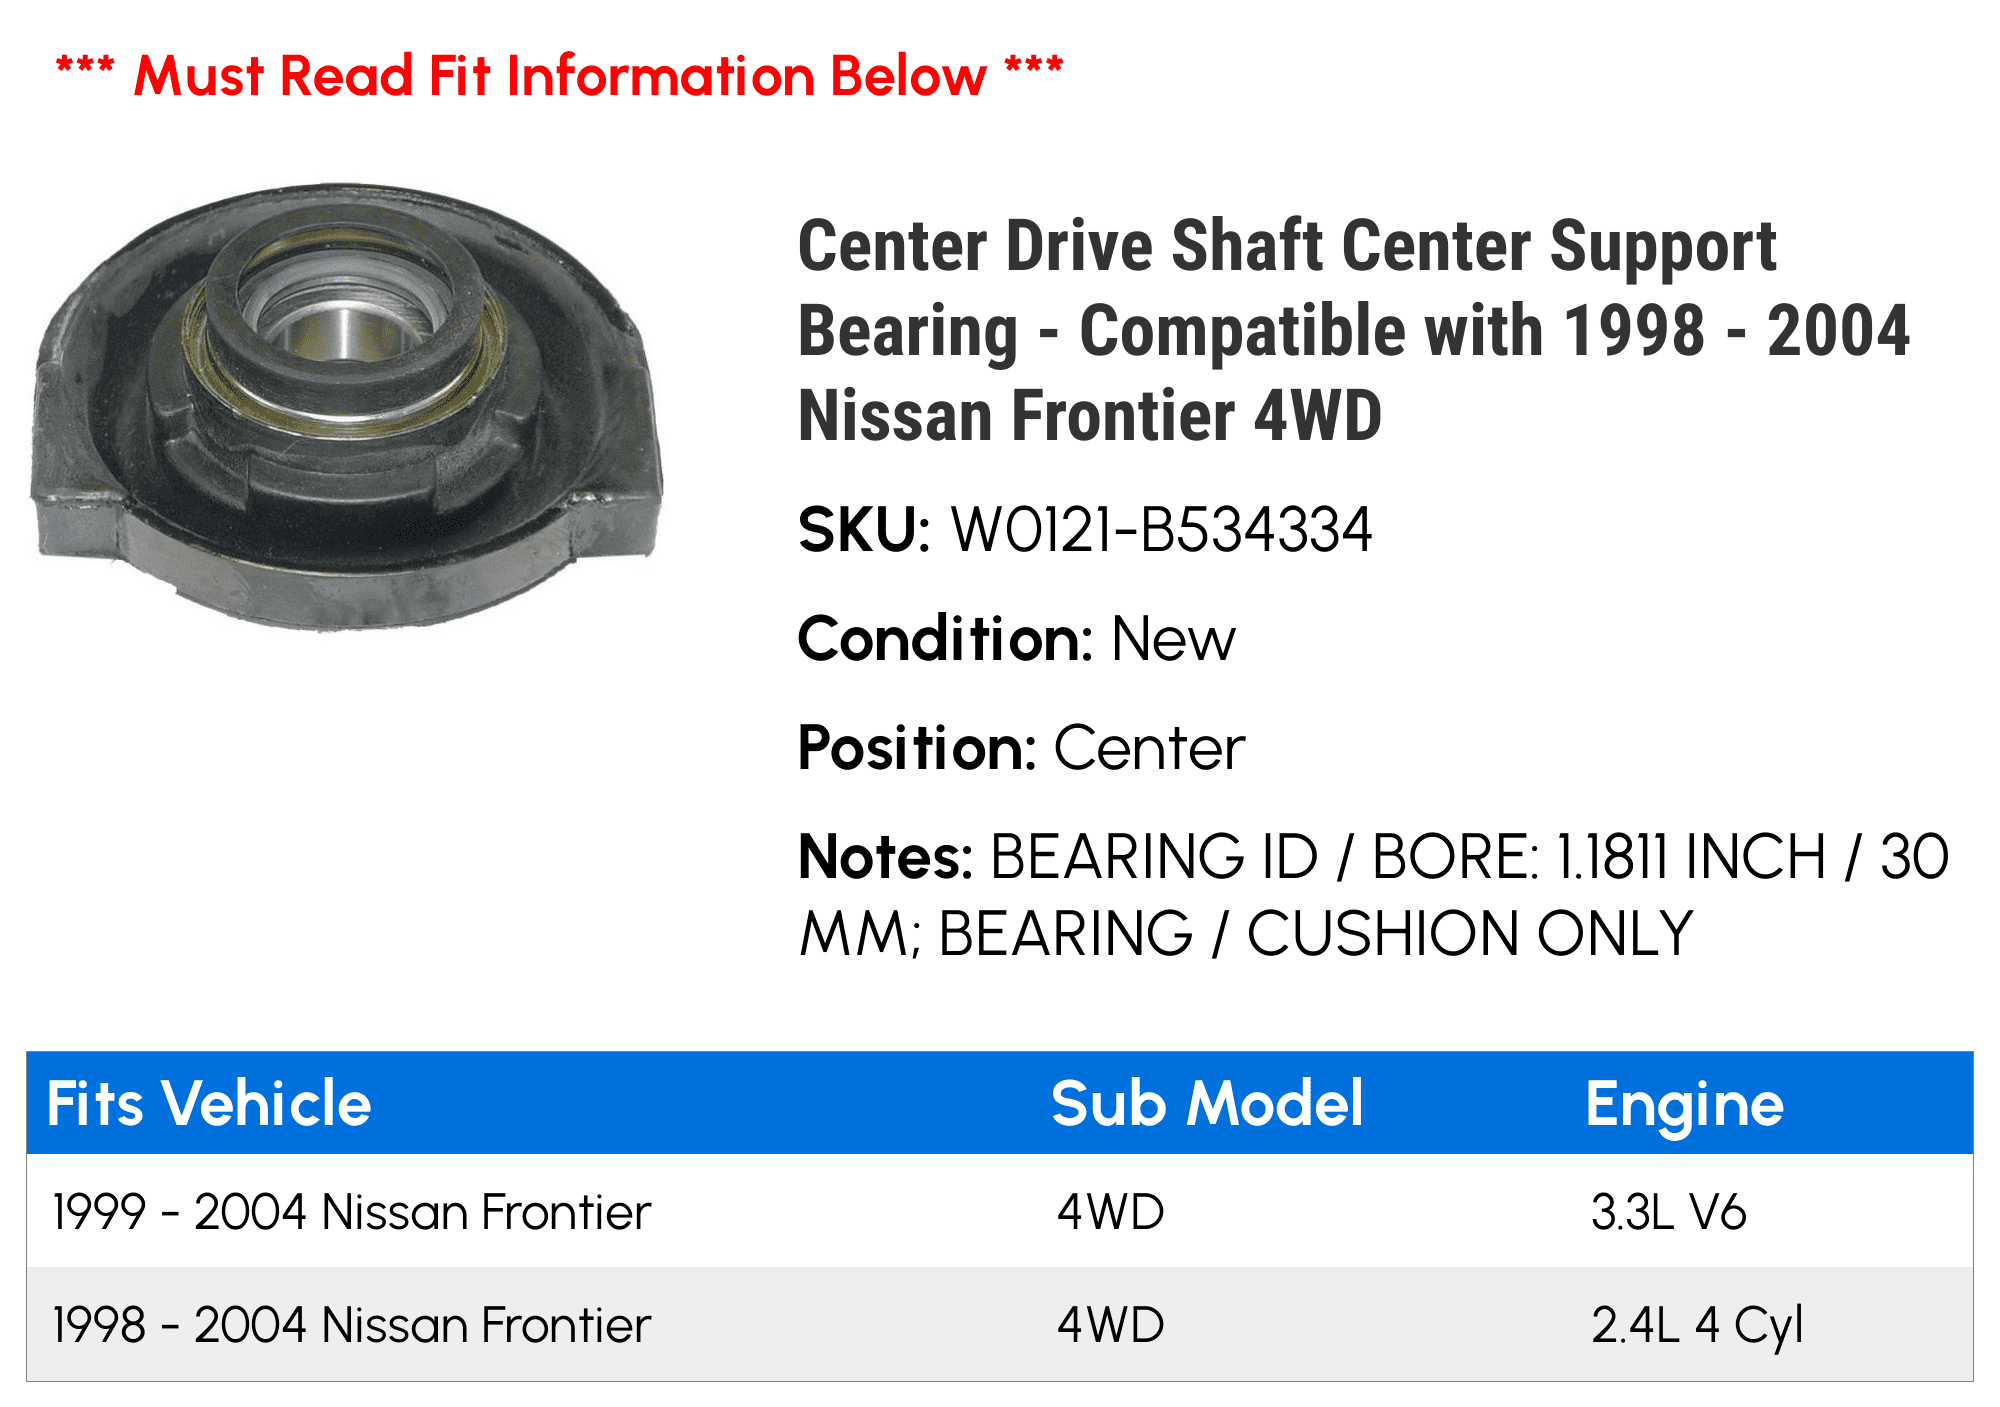 Compatible with 1998-2004 Nissan Frontier 4WD Center Drive Shaft Center Support Bearing 